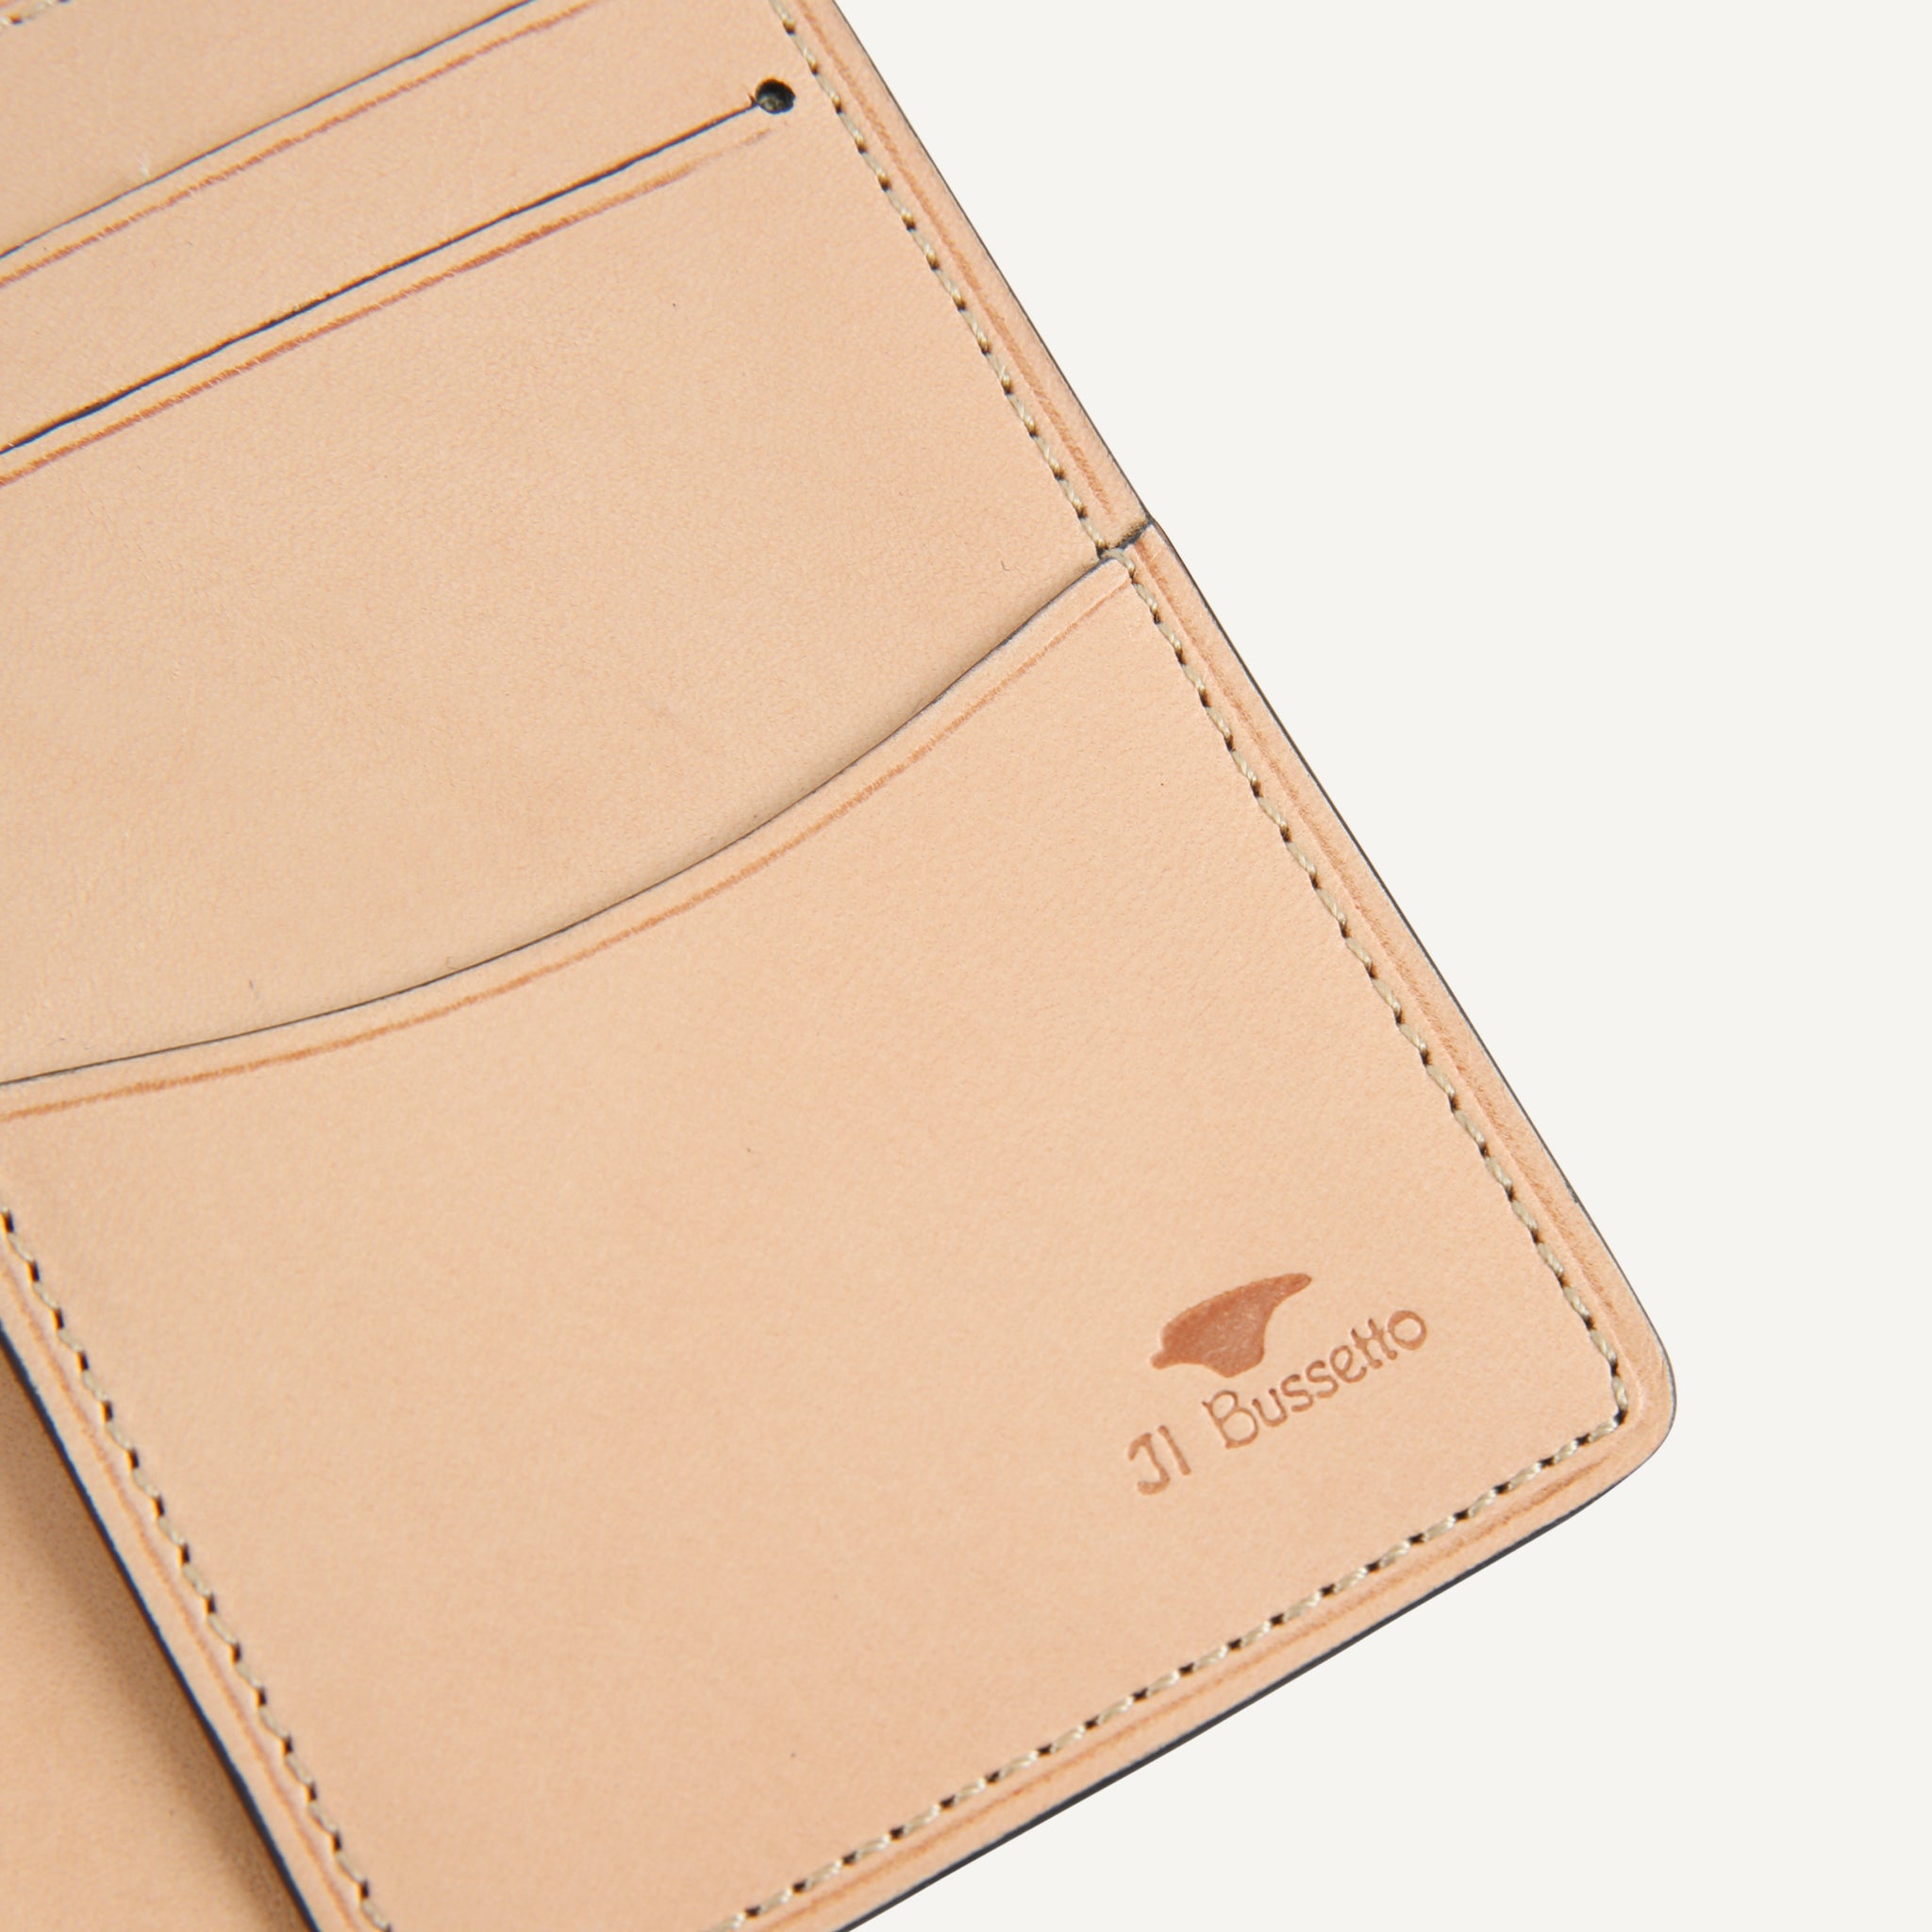 Men's slim bifold leather card holder | Il Bussetto — Calame Palma